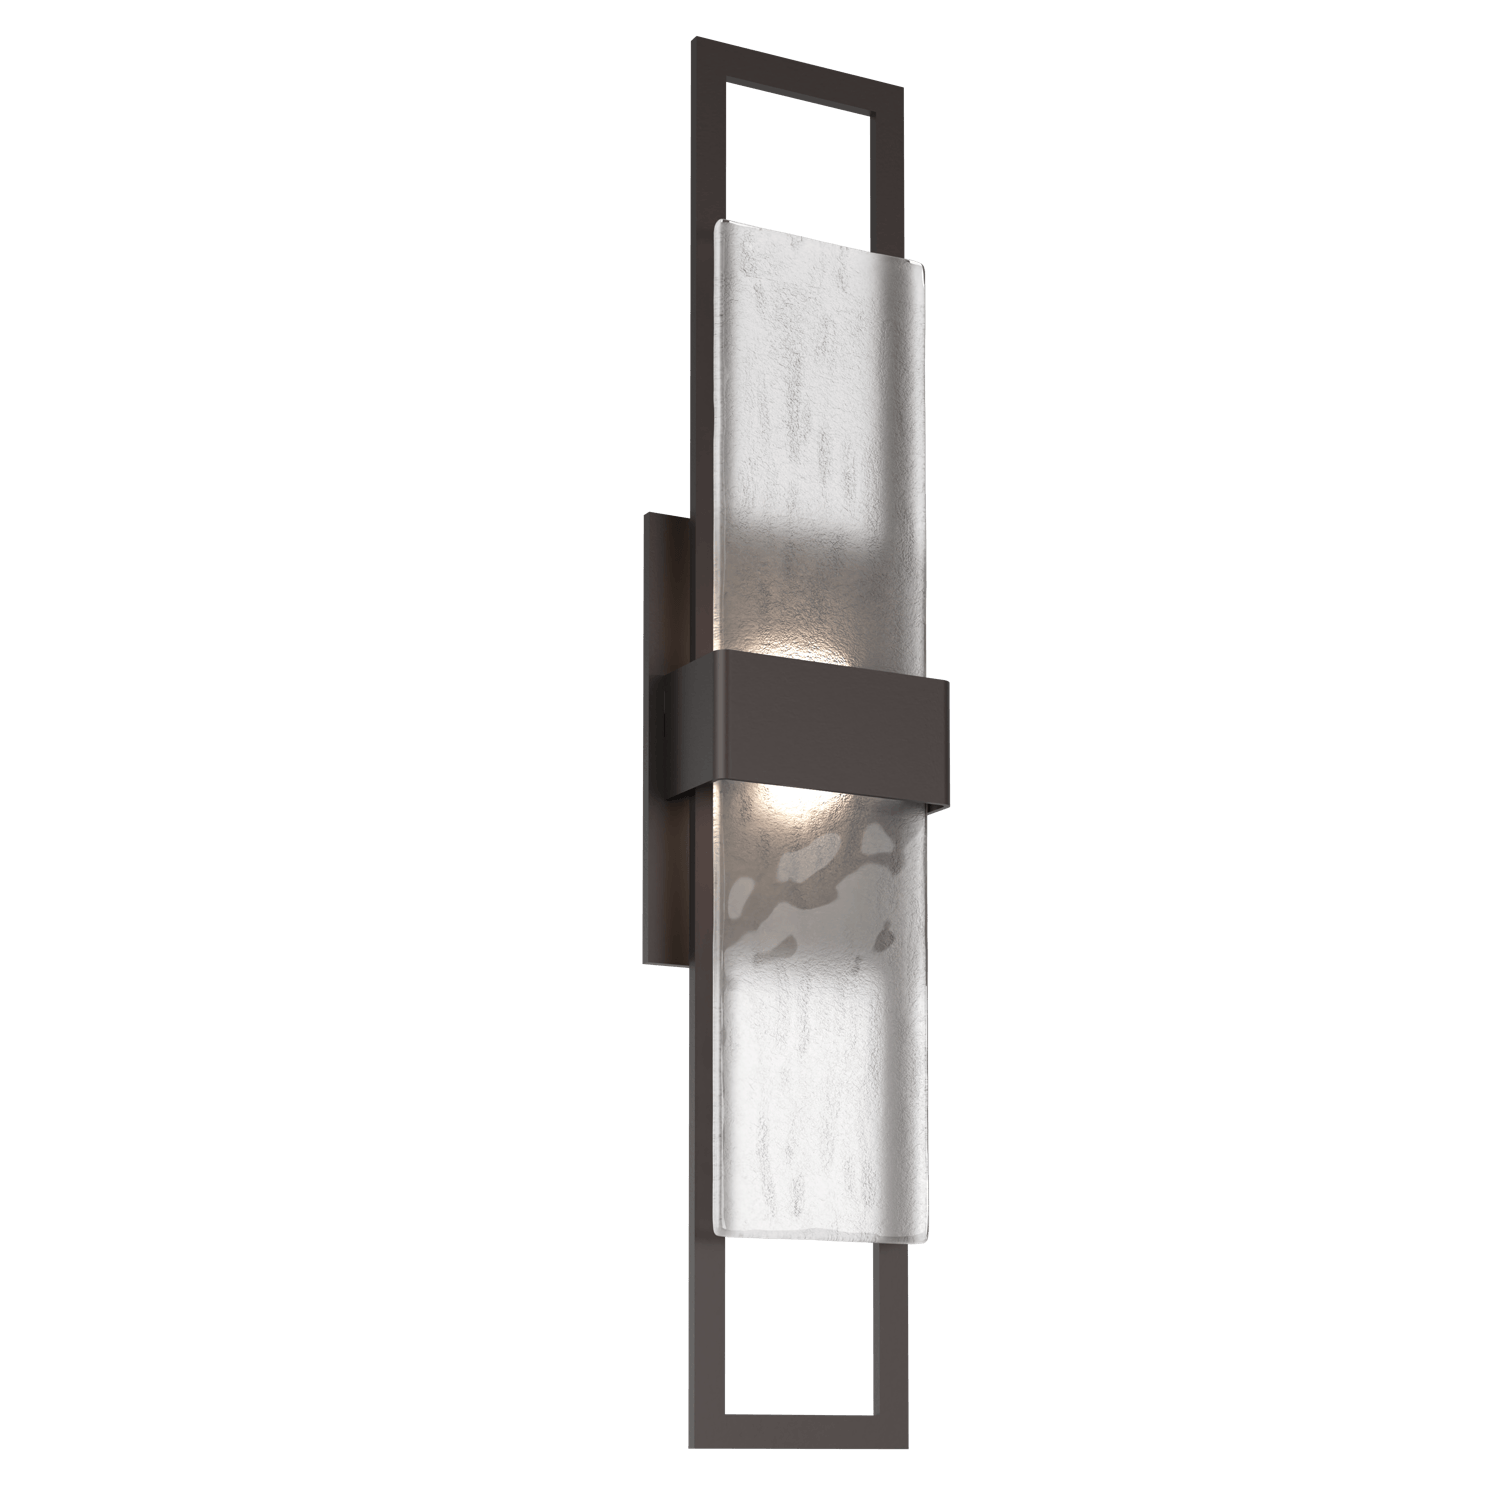 ODB0085-02-SB-CG-Hammerton-Studio-Sasha-28-inch-outdoor-sconce-with-statuary-bronze-finish-and-clear-granite-glass-shades-and-LED-lamping